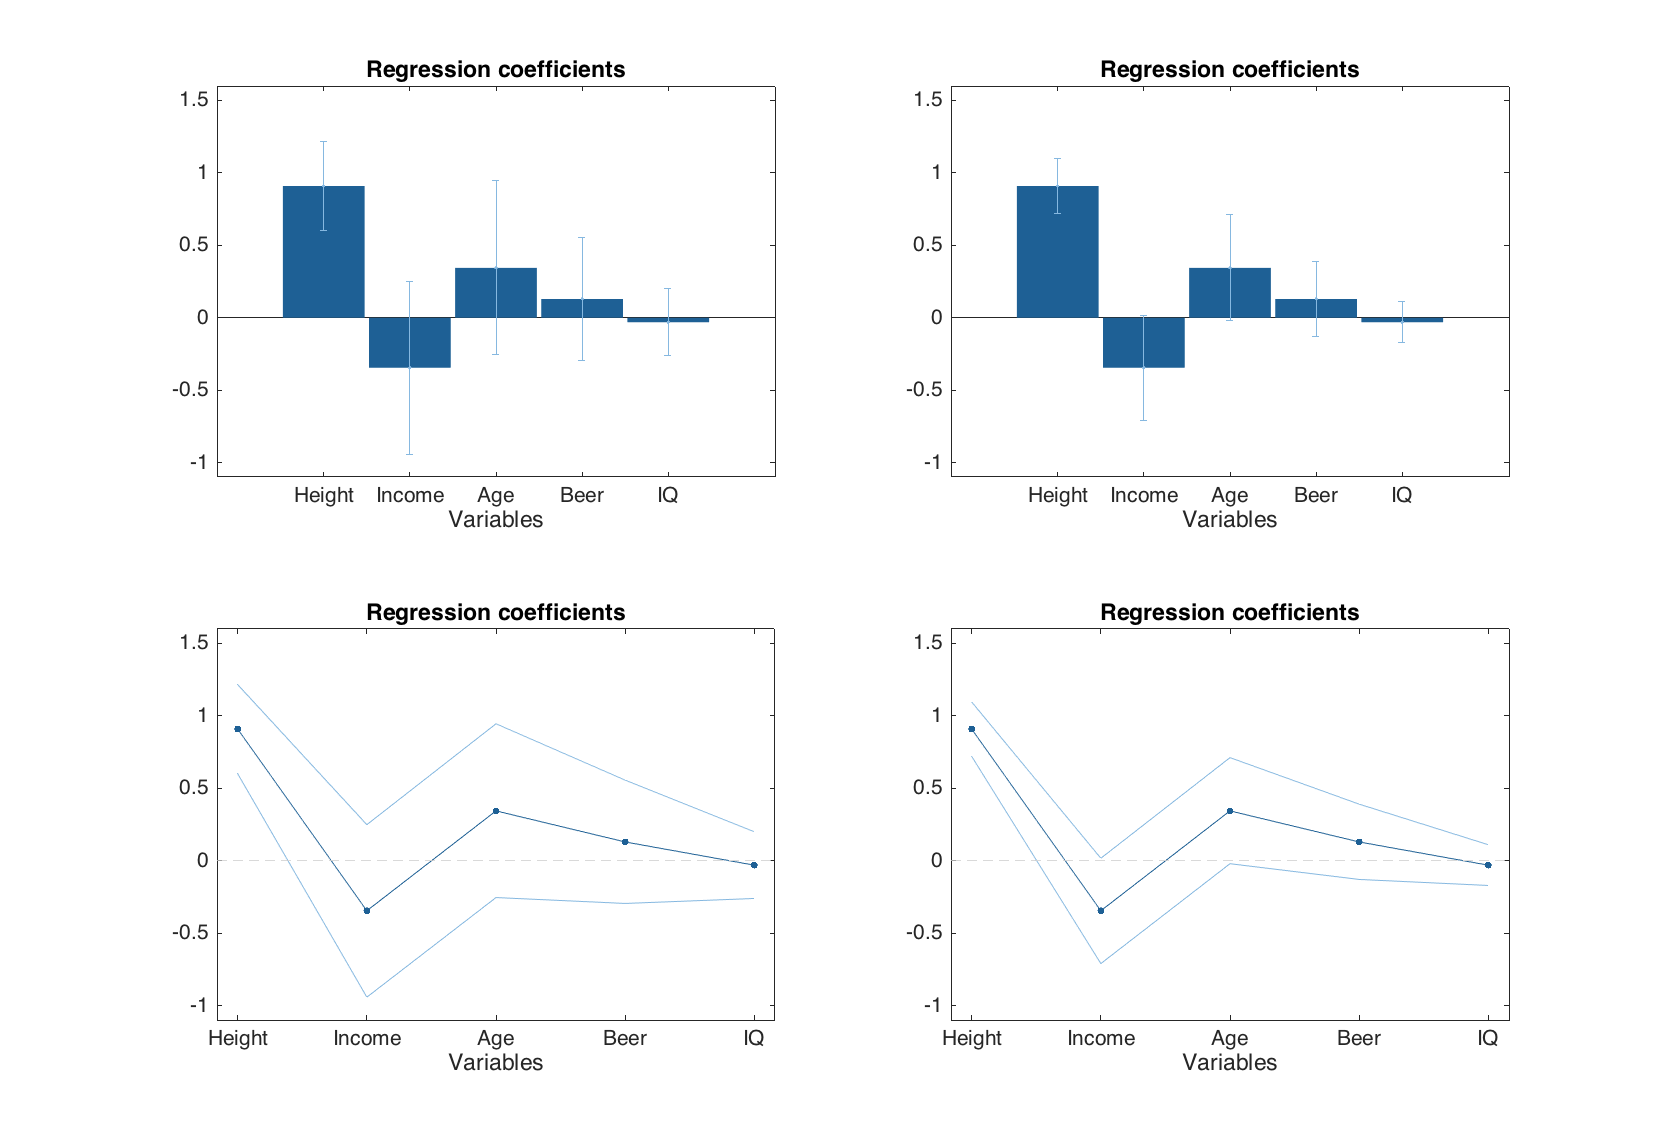 Regression coefficients plots with confidence intervals